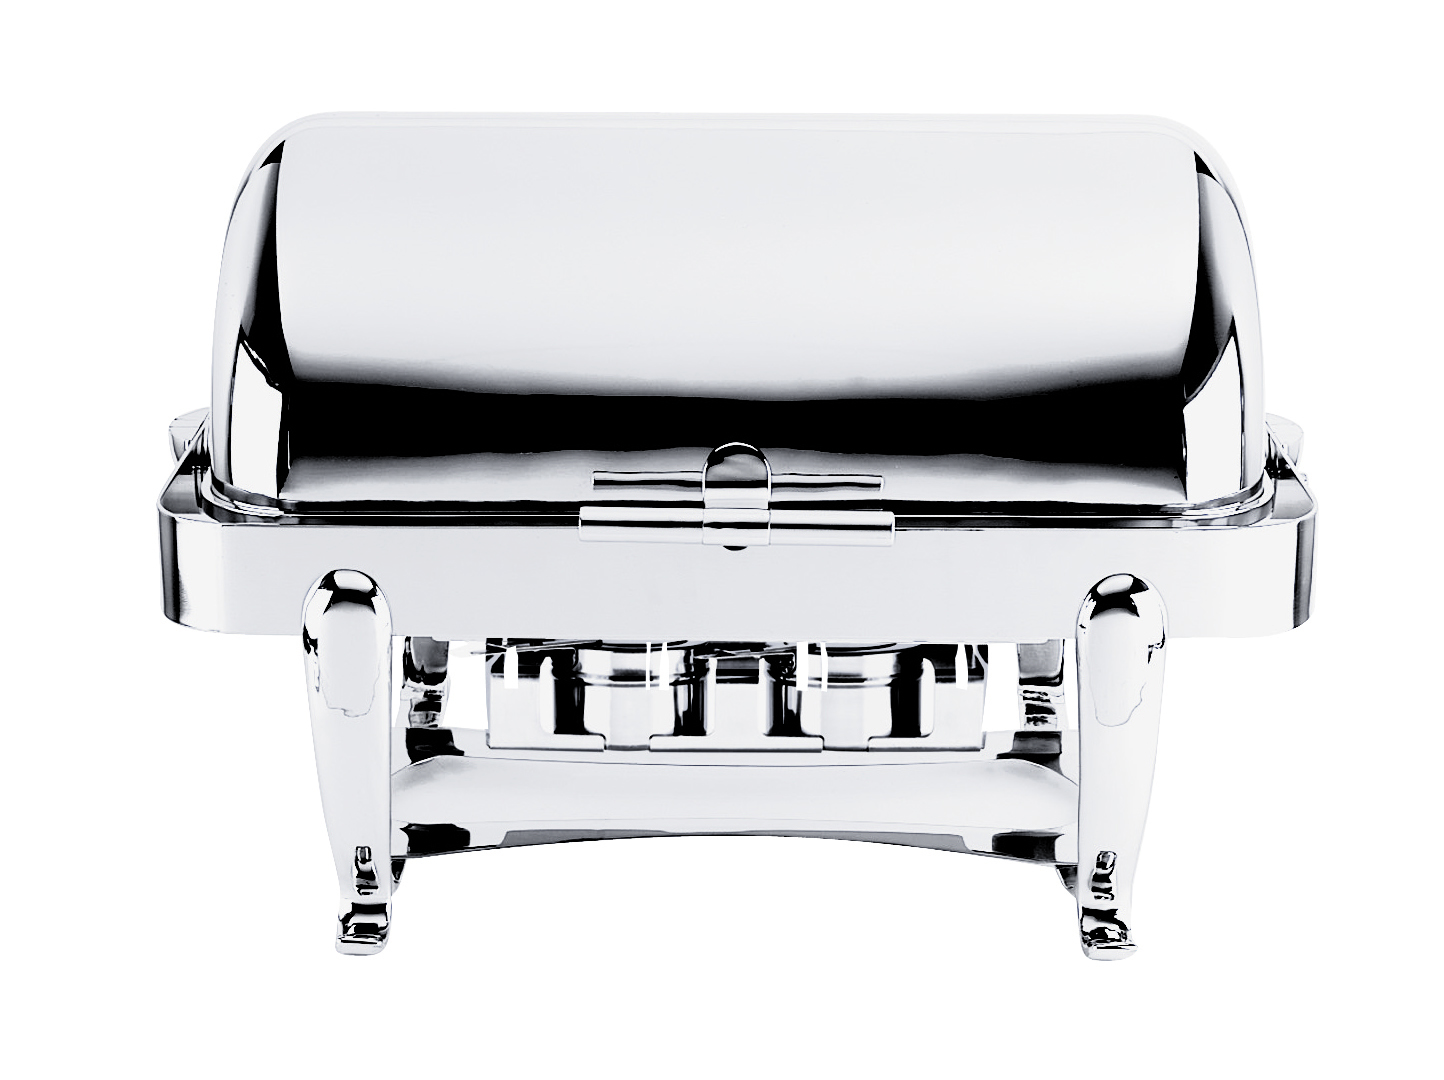 MEPRA Chafing-dish RollTop 207199